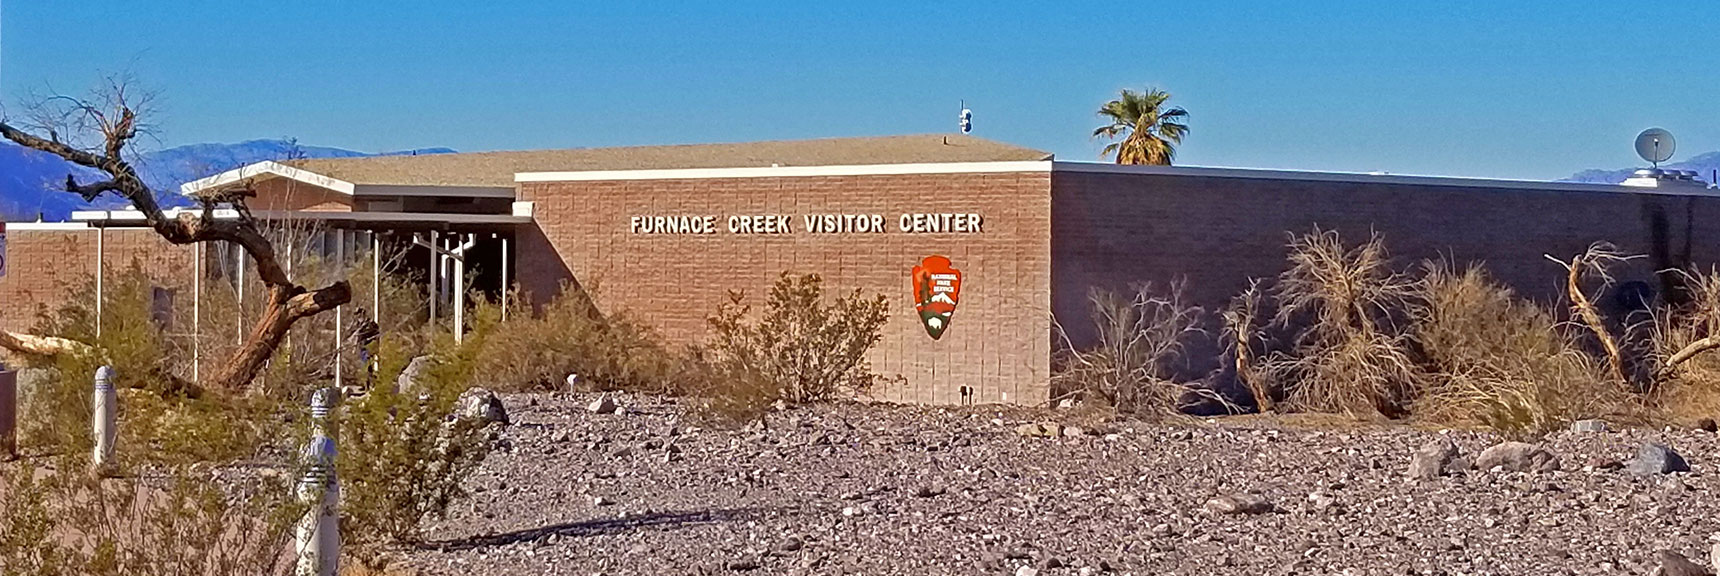 Furnace Creek Visitor Center in Death Valley, CA | Tea House & Table Rock Circuit | Furnace Creek | Death Valley National Park, California